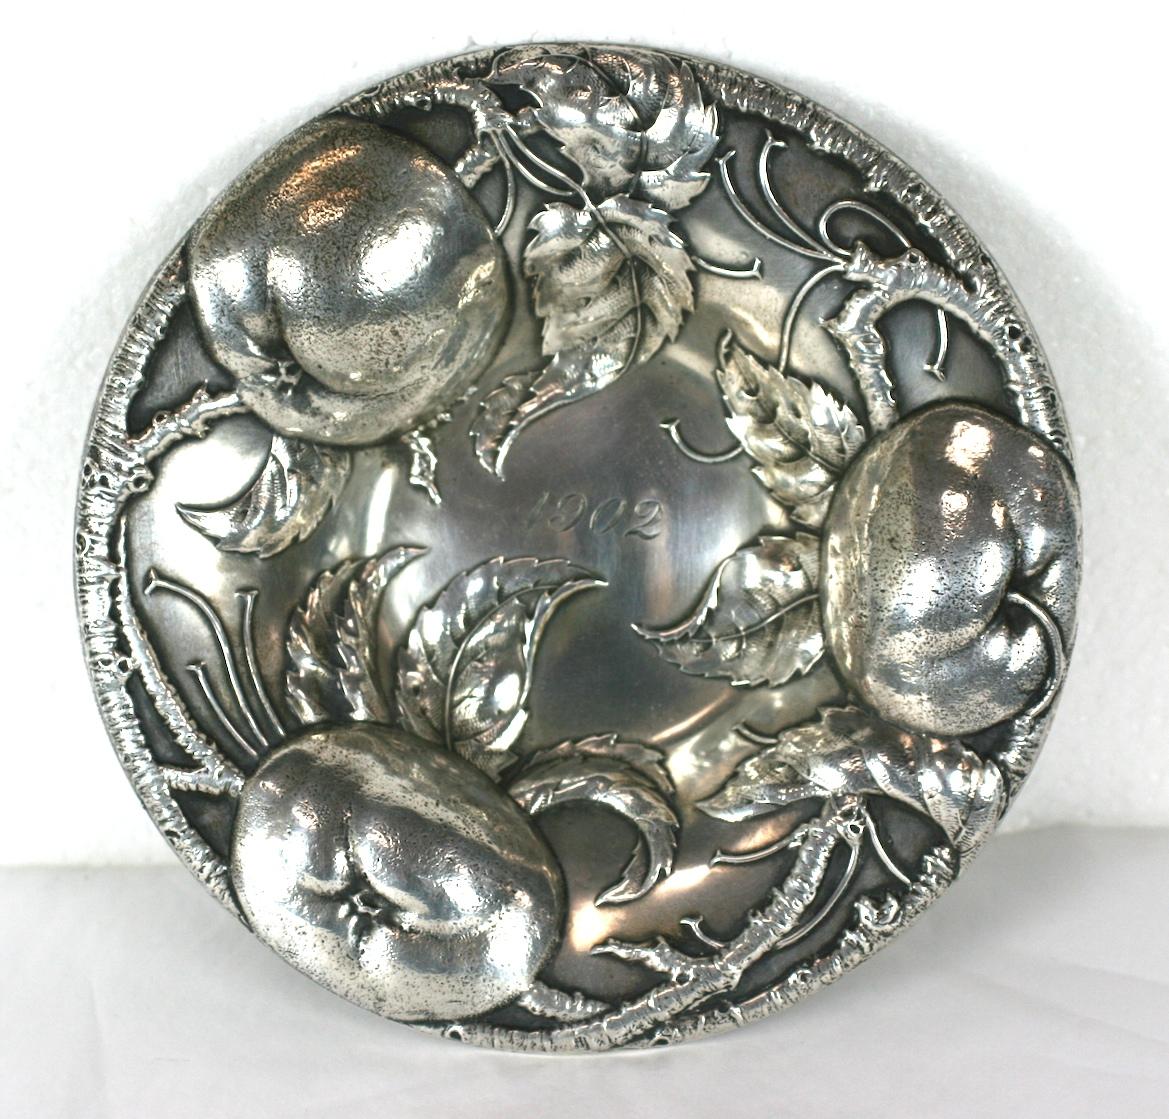 Victorian sterling dish by Alvin of high relief apples, branches and leaves. Amazing detail and quality. Monogrammed 1902. Wonderful gift. 
6.5